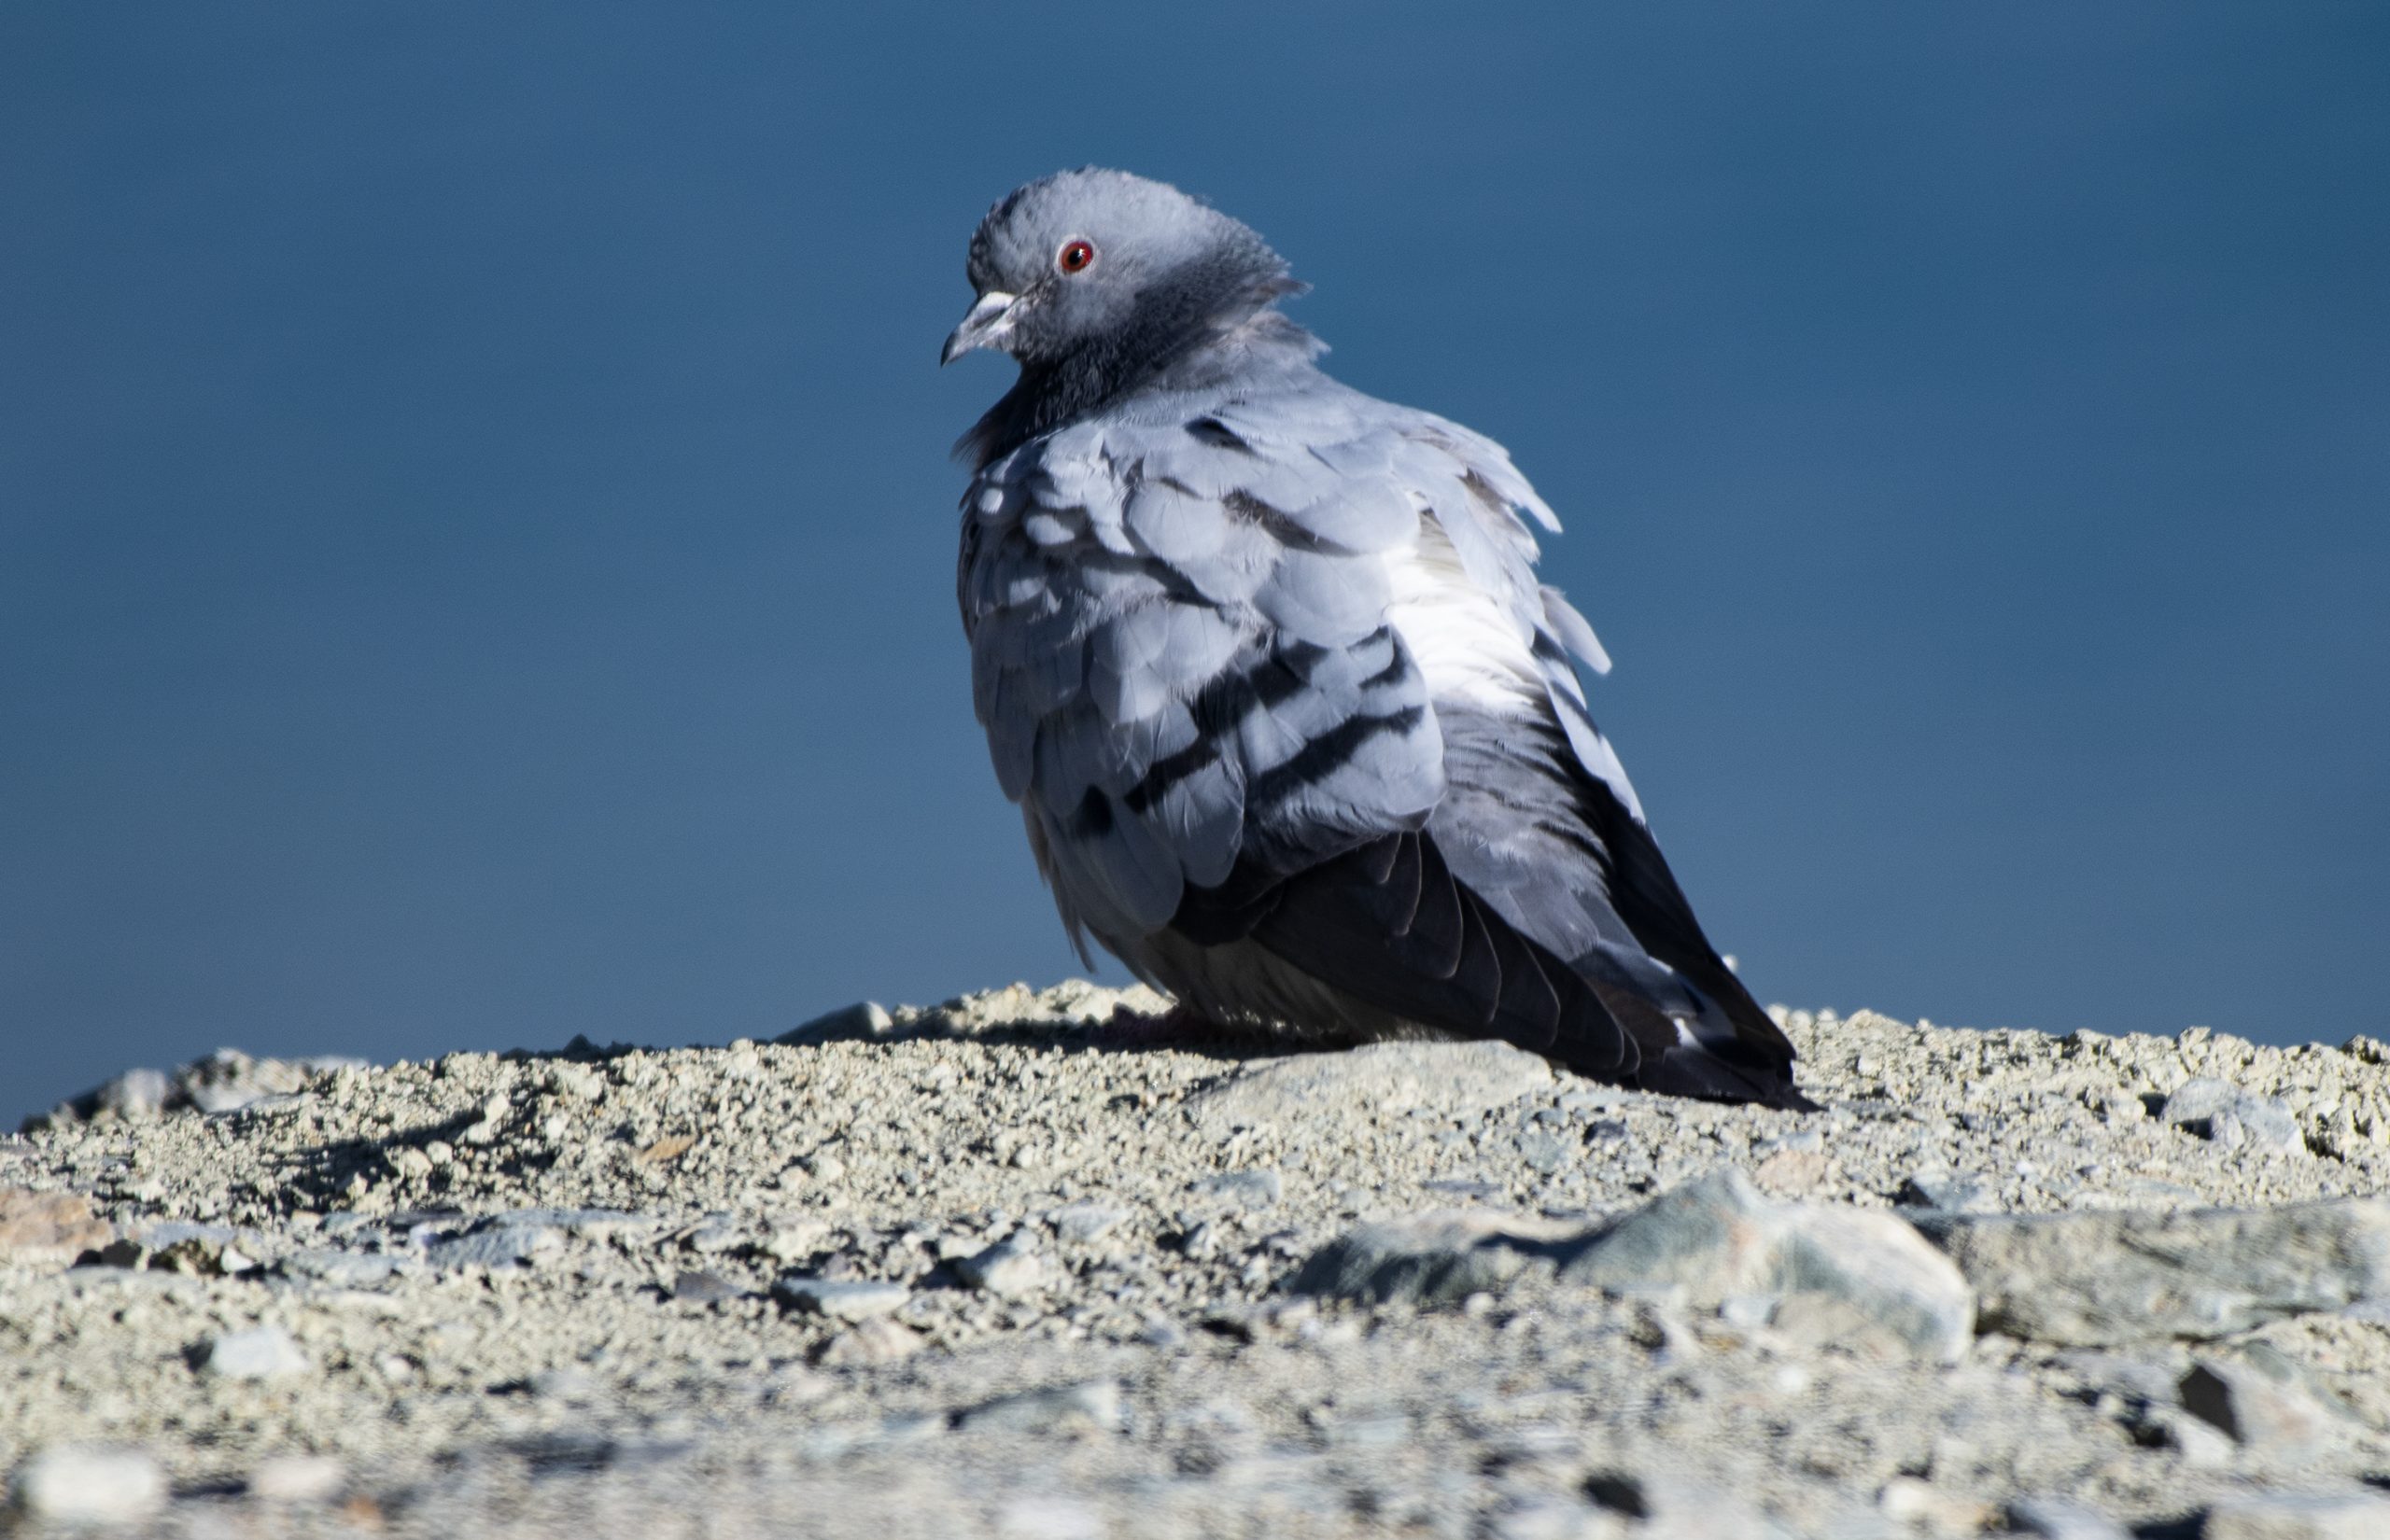 A pigeon on a dry land